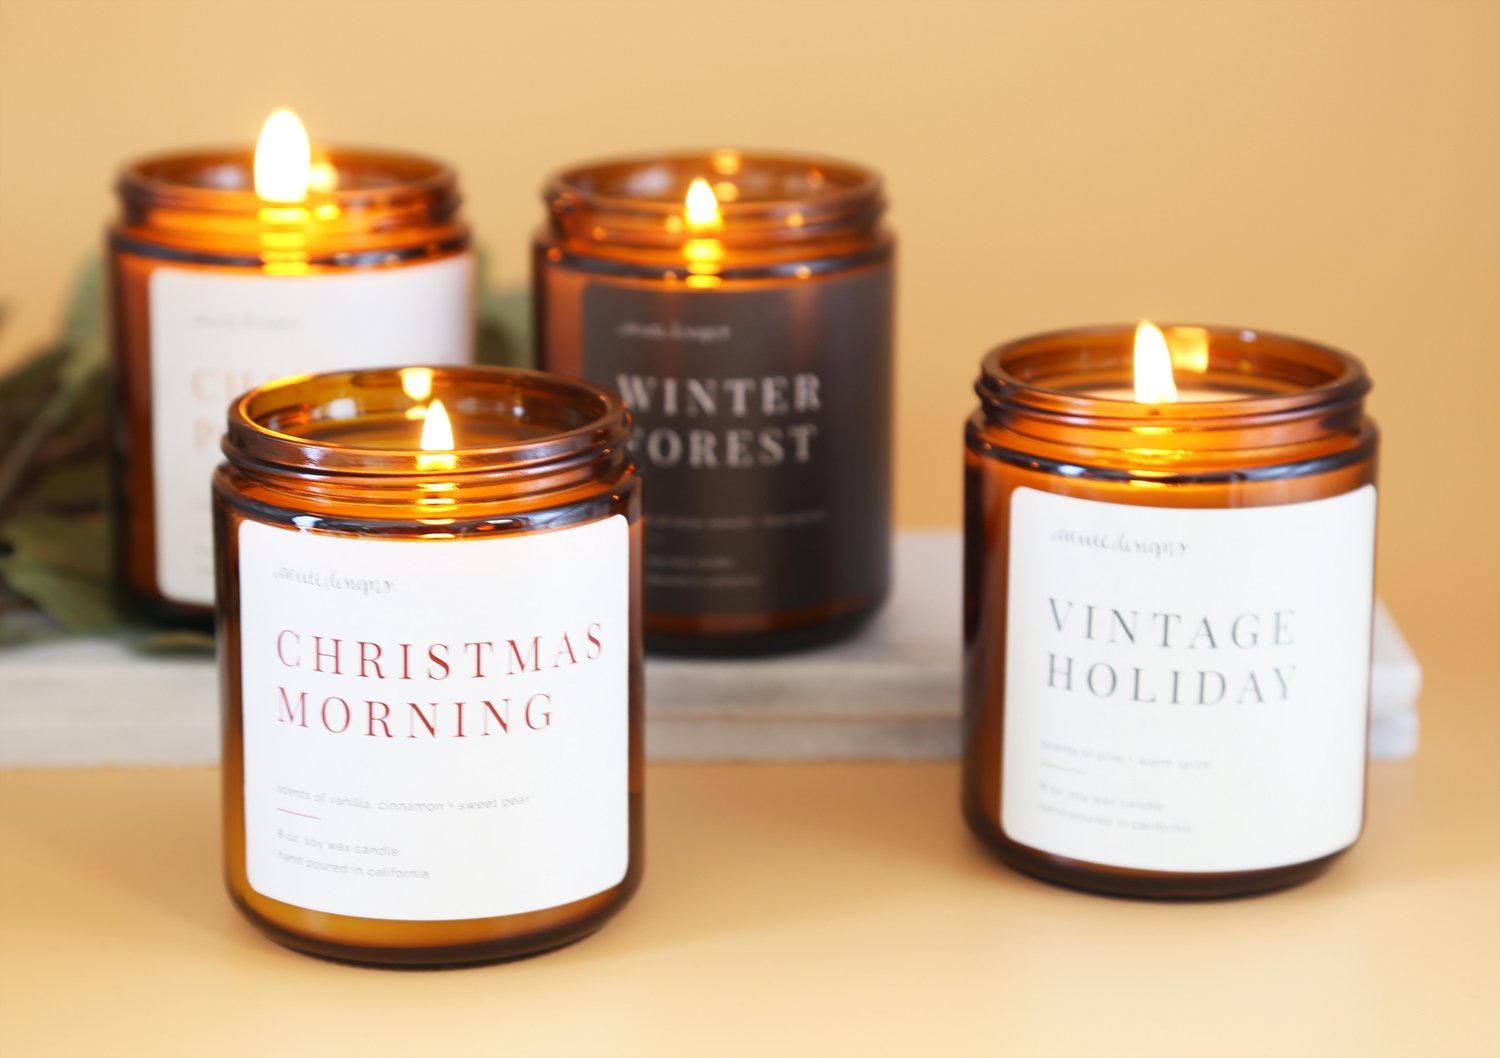 Champagne Pop Candle -  Scented Holiday Candle, Scents of champagne and bright grapefruit